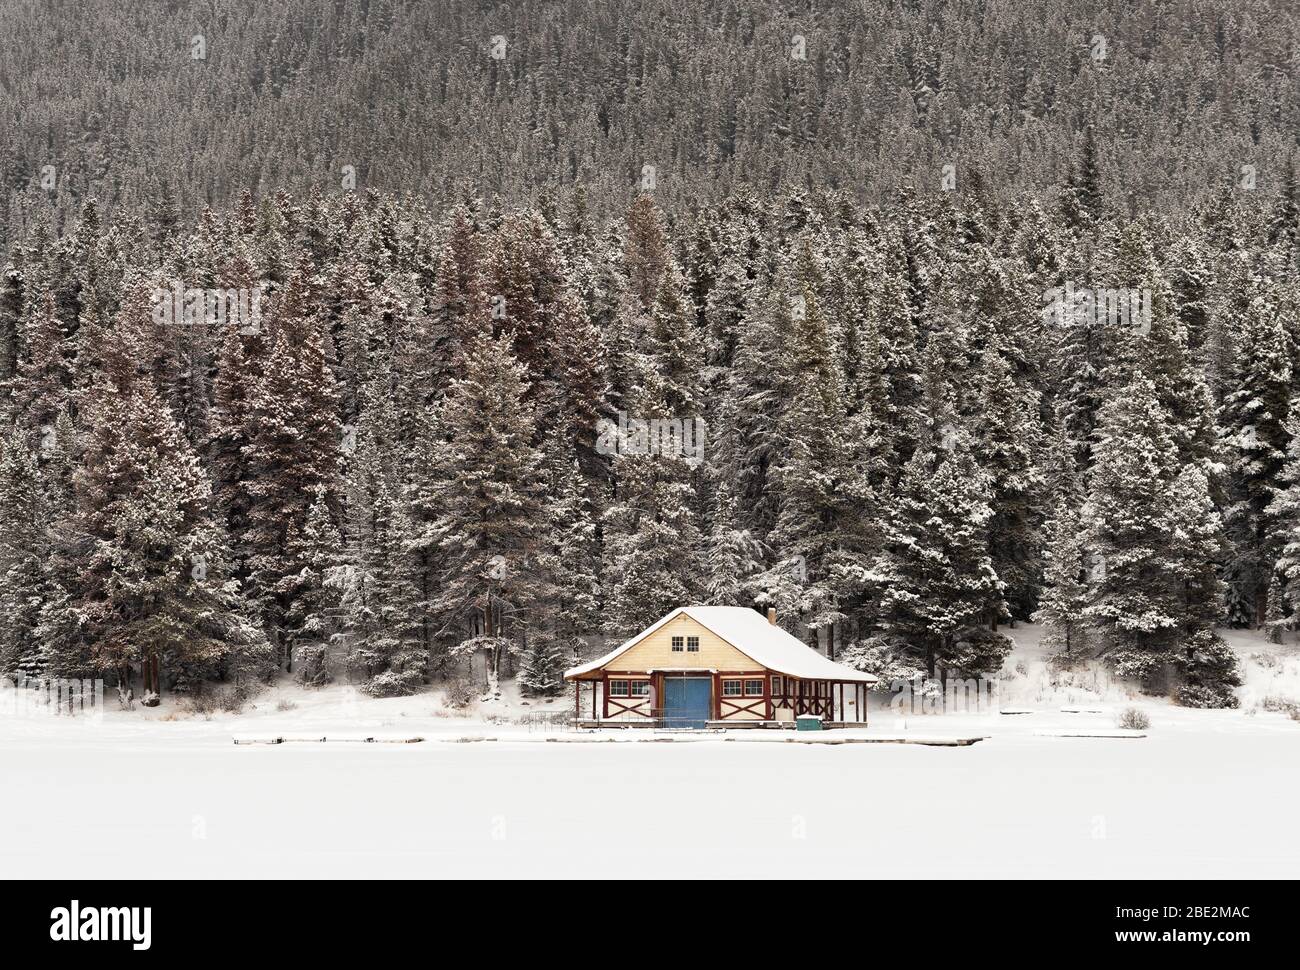 Frozen and snow covered Maligne lake with the Maligne Lake Boat House in front of a snow covered pine forest, Jasper National Park, Alberta, Canada Stock Photo